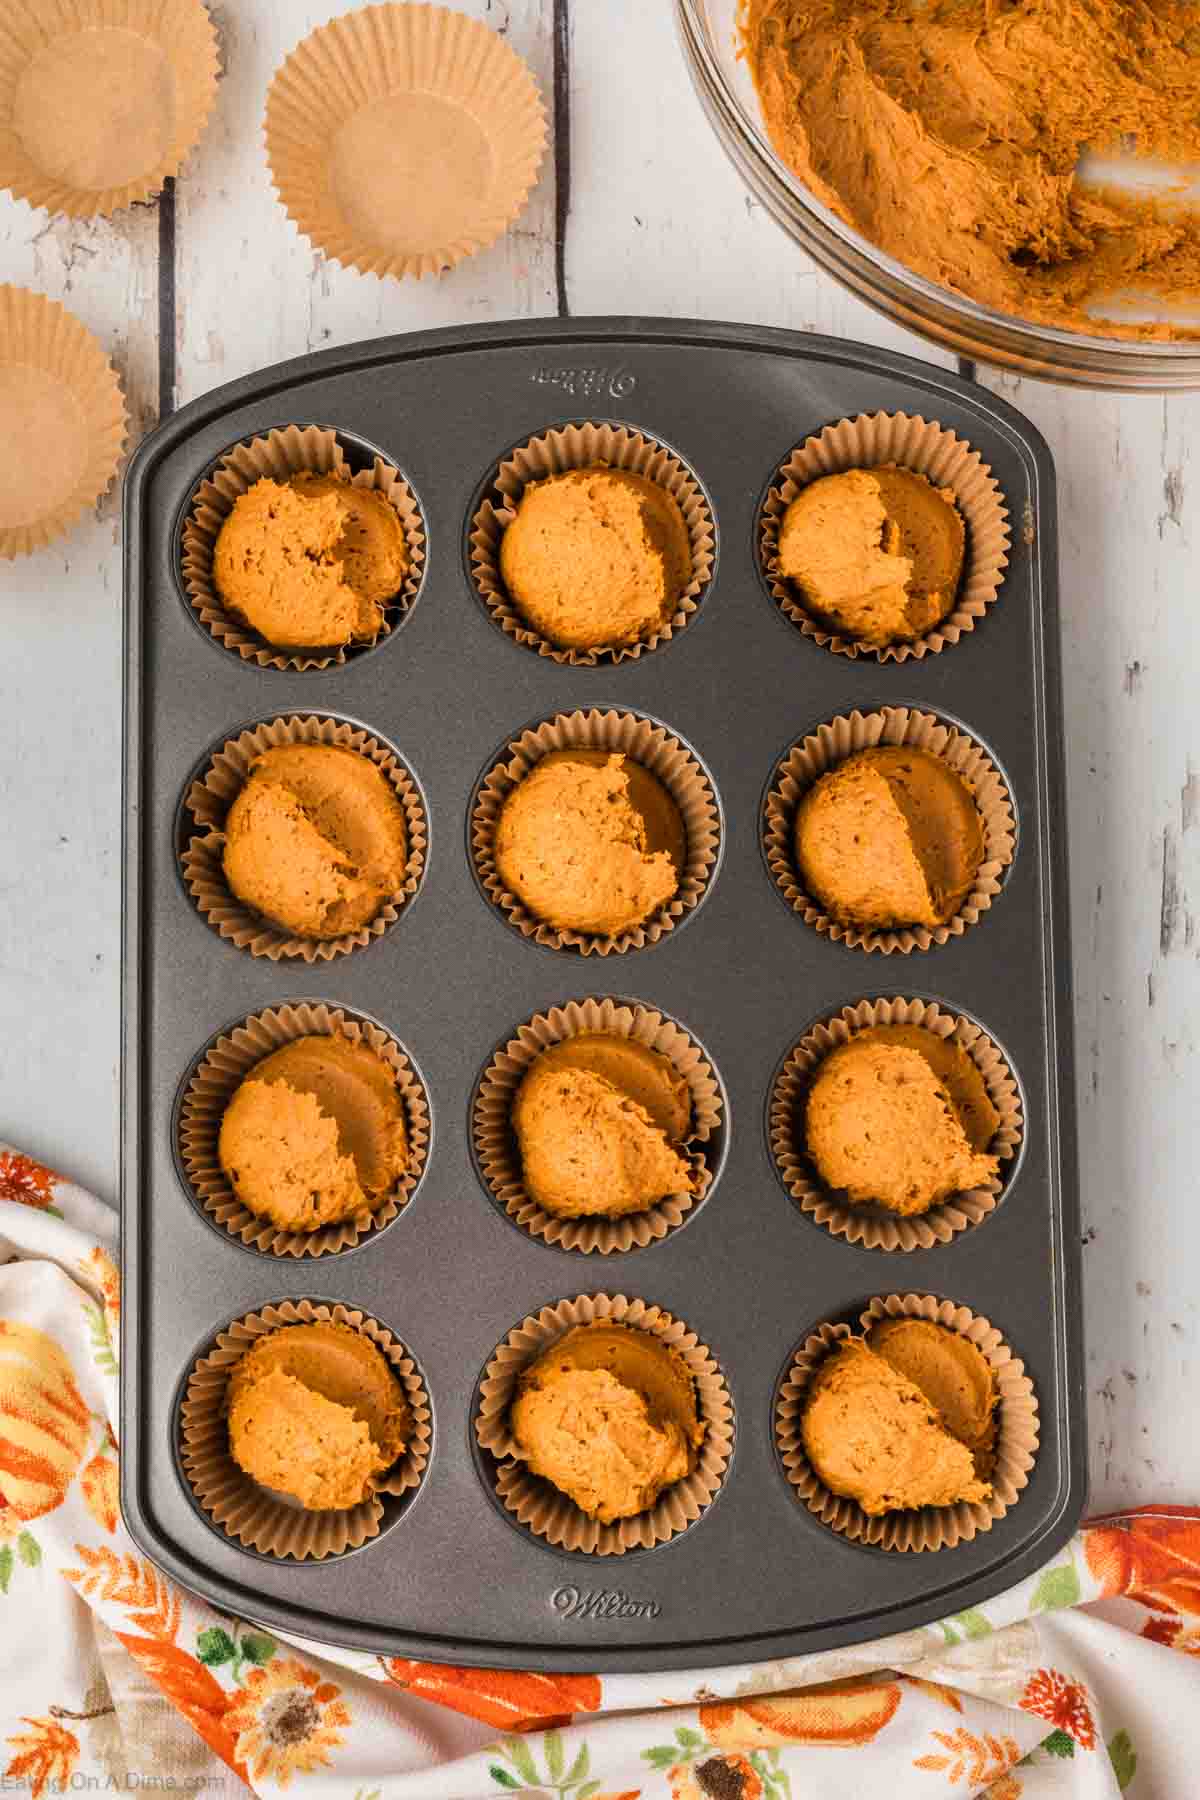 A muffin tray lined with beige paper cups, each filled with dollops of orange batter for 2 Ingredient Pumpkin Muffins, is placed on a white wooden surface. A bowl with remaining orange batter and additional paper cups are nearby. The corner of a patterned cloth with orange and green designs is visible.